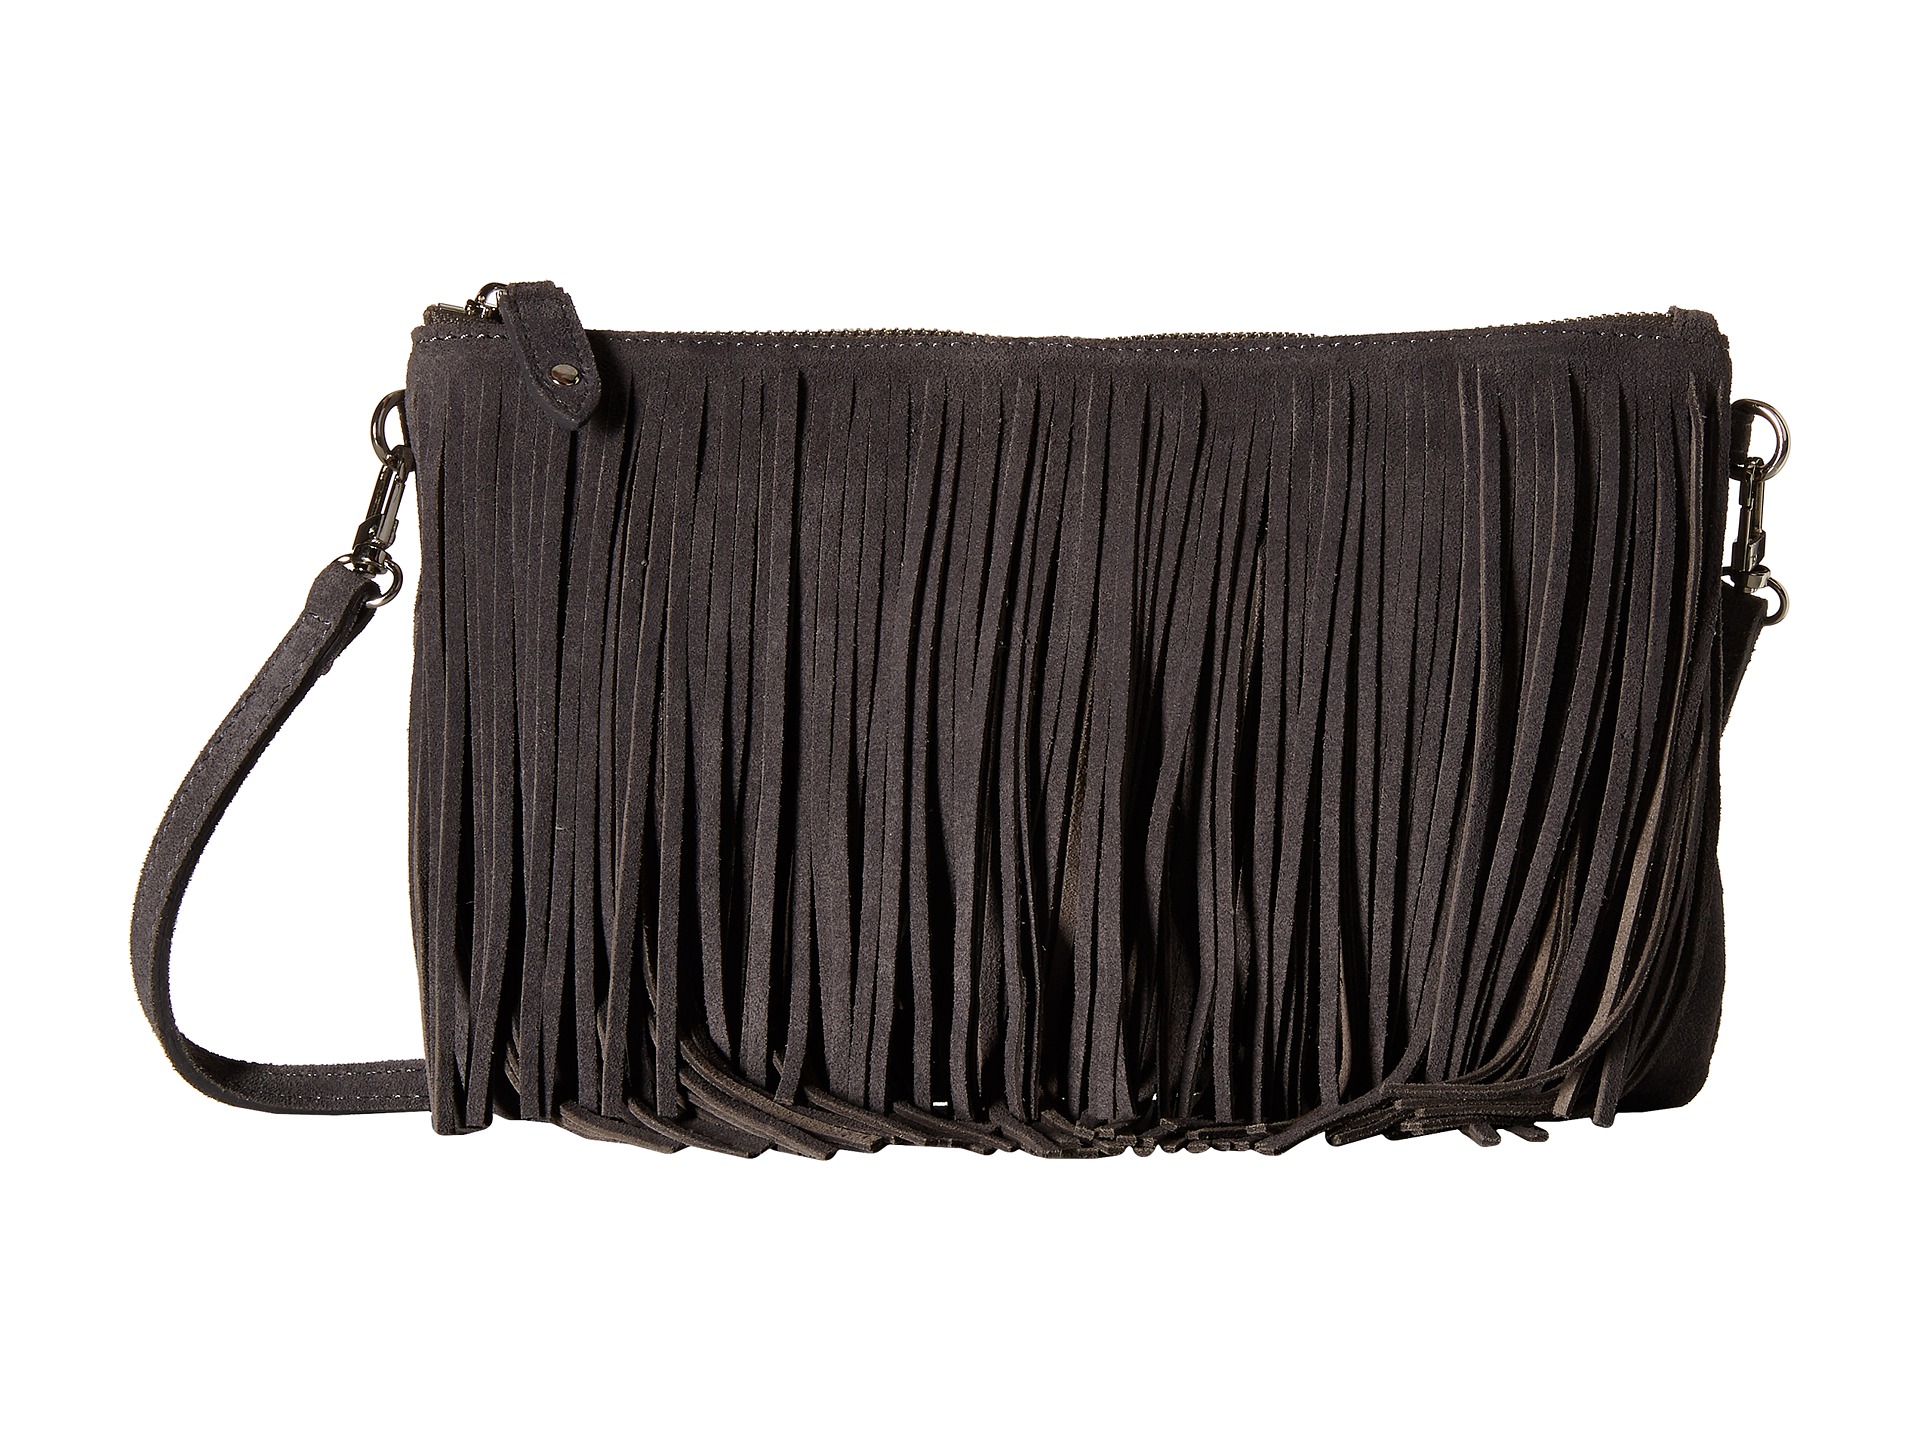 Mighty Purse Fringe X Body Bag Black Suede Leather